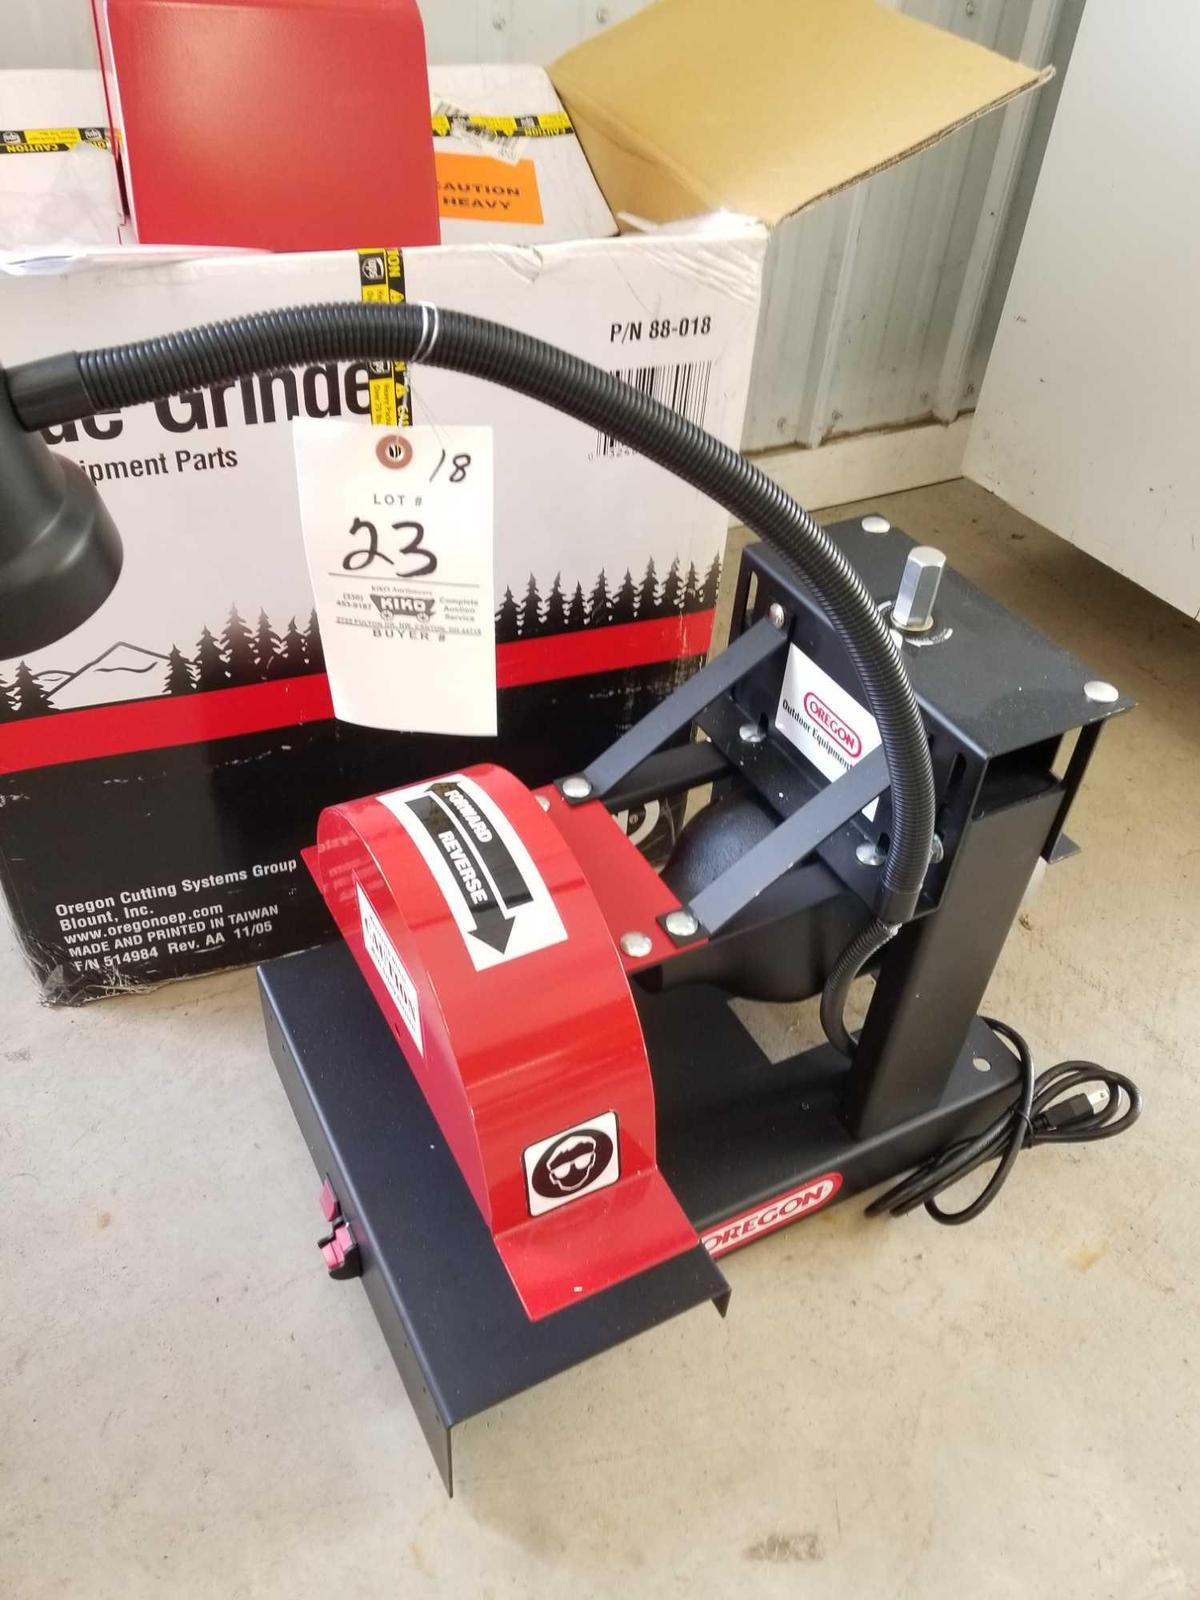 Oregon surface grinder with box, like new